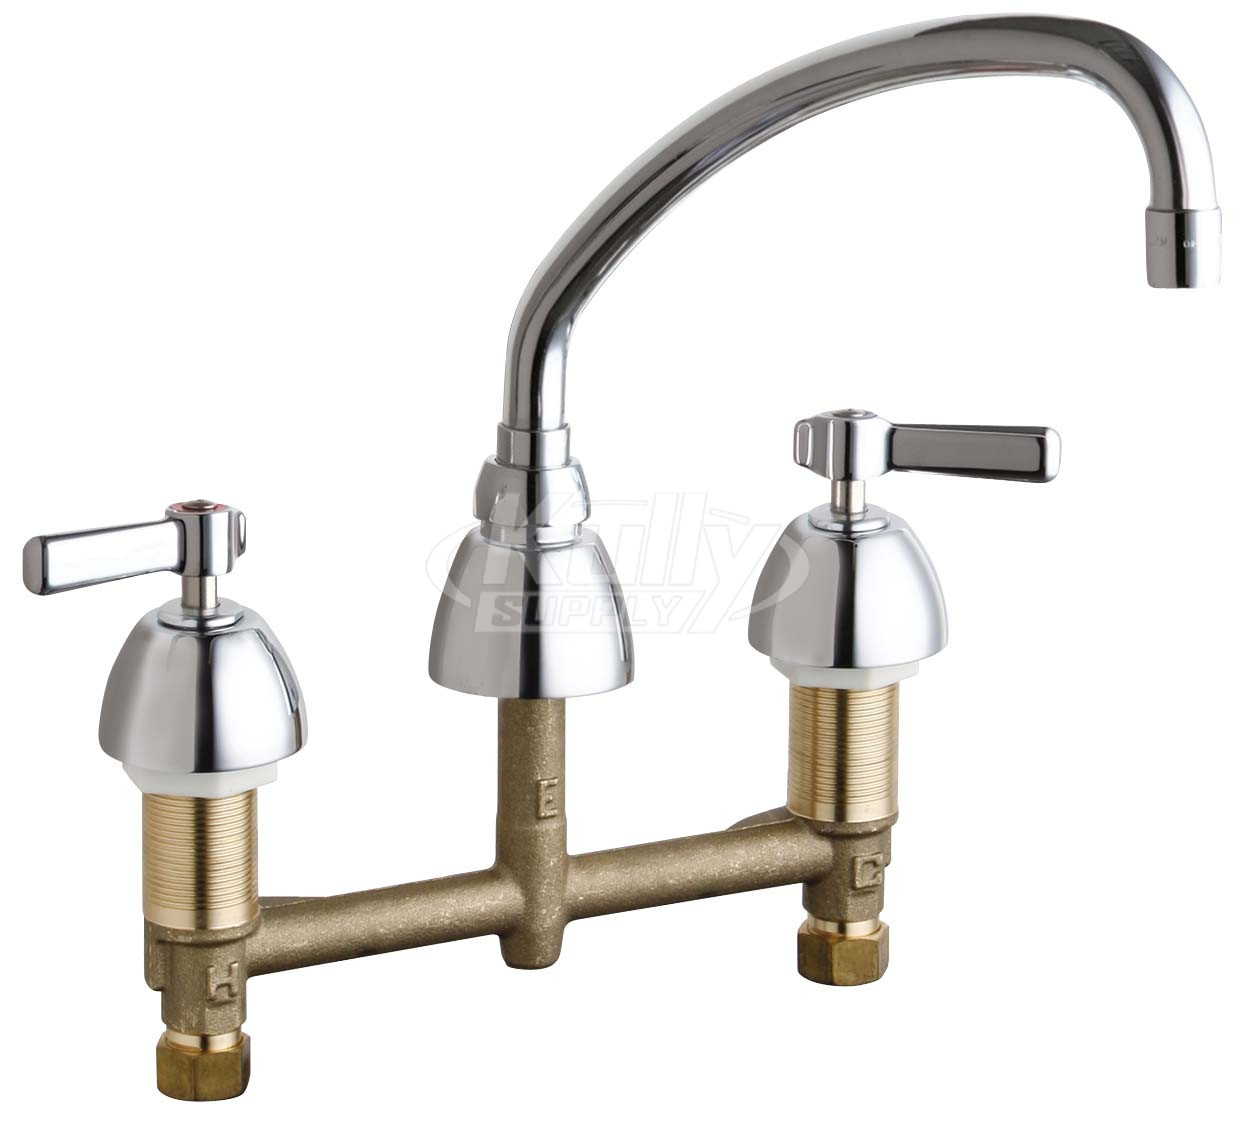 Chicago 201-AXKABCP Concealed Hot and Cold Water Sink Faucet